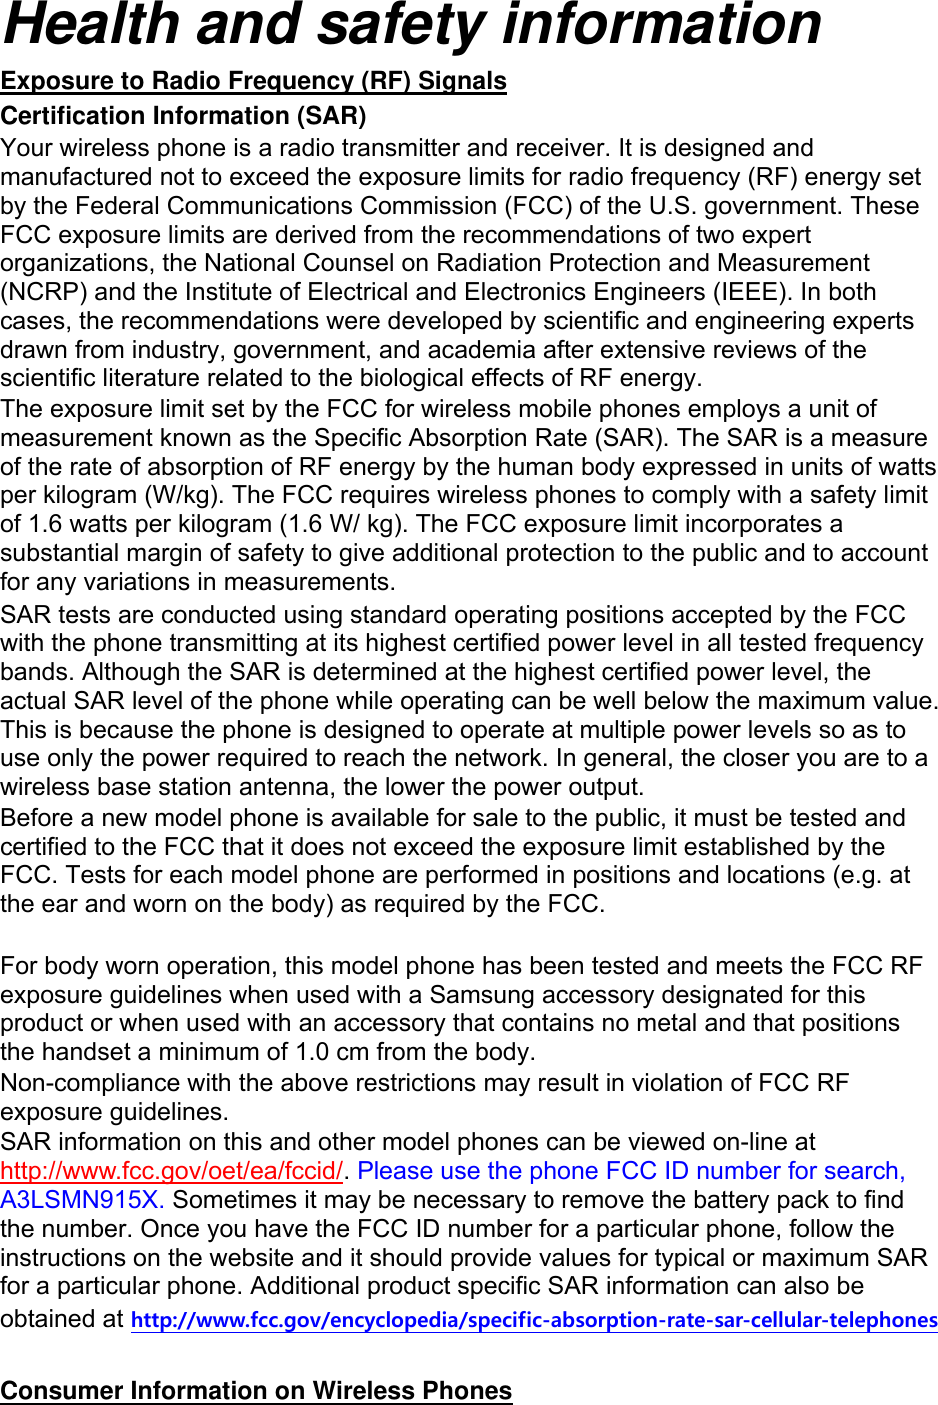 Health and safety information Exposure to Radio Frequency (RF) Signals Certification Information (SAR) Your wireless phone is a radio transmitter and receiver. It is designed and manufactured not to exceed the exposure limits for radio frequency (RF) energy set by the Federal Communications Commission (FCC) of the U.S. government. These FCC exposure limits are derived from the recommendations of two expert organizations, the National Counsel on Radiation Protection and Measurement (NCRP) and the Institute of Electrical and Electronics Engineers (IEEE). In both cases, the recommendations were developed by scientific and engineering experts drawn from industry, government, and academia after extensive reviews of the scientific literature related to the biological effects of RF energy. The exposure limit set by the FCC for wireless mobile phones employs a unit of measurement known as the Specific Absorption Rate (SAR). The SAR is a measure of the rate of absorption of RF energy by the human body expressed in units of watts per kilogram (W/kg). The FCC requires wireless phones to comply with a safety limit of 1.6 watts per kilogram (1.6 W/ kg). The FCC exposure limit incorporates a substantial margin of safety to give additional protection to the public and to account for any variations in measurements. SAR tests are conducted using standard operating positions accepted by the FCC with the phone transmitting at its highest certified power level in all tested frequency bands. Although the SAR is determined at the highest certified power level, the actual SAR level of the phone while operating can be well below the maximum value. This is because the phone is designed to operate at multiple power levels so as to use only the power required to reach the network. In general, the closer you are to a wireless base station antenna, the lower the power output. Before a new model phone is available for sale to the public, it must be tested and certified to the FCC that it does not exceed the exposure limit established by the FCC. Tests for each model phone are performed in positions and locations (e.g. at the ear and worn on the body) as required by the FCC.      For body worn operation, this model phone has been tested and meets the FCC RF exposure guidelines when used with a Samsung accessory designated for this product or when used with an accessory that contains no metal and that positions the handset a minimum of 1.0 cm from the body.   Non-compliance with the above restrictions may result in violation of FCC RF exposure guidelines. SAR information on this and other model phones can be viewed on-line at http://www.fcc.gov/oet/ea/fccid/. Please use the phone FCC ID number for search, A3LSMN915X. Sometimes it may be necessary to remove the battery pack to find the number. Once you have the FCC ID number for a particular phone, follow the instructions on the website and it should provide values for typical or maximum SAR for a particular phone. Additional product specific SAR information can also be obtained at http://www.fcc.gov/encyclopedia/specific-absorption-rate-sar-cellular-telephones  Consumer Information on Wireless Phones 